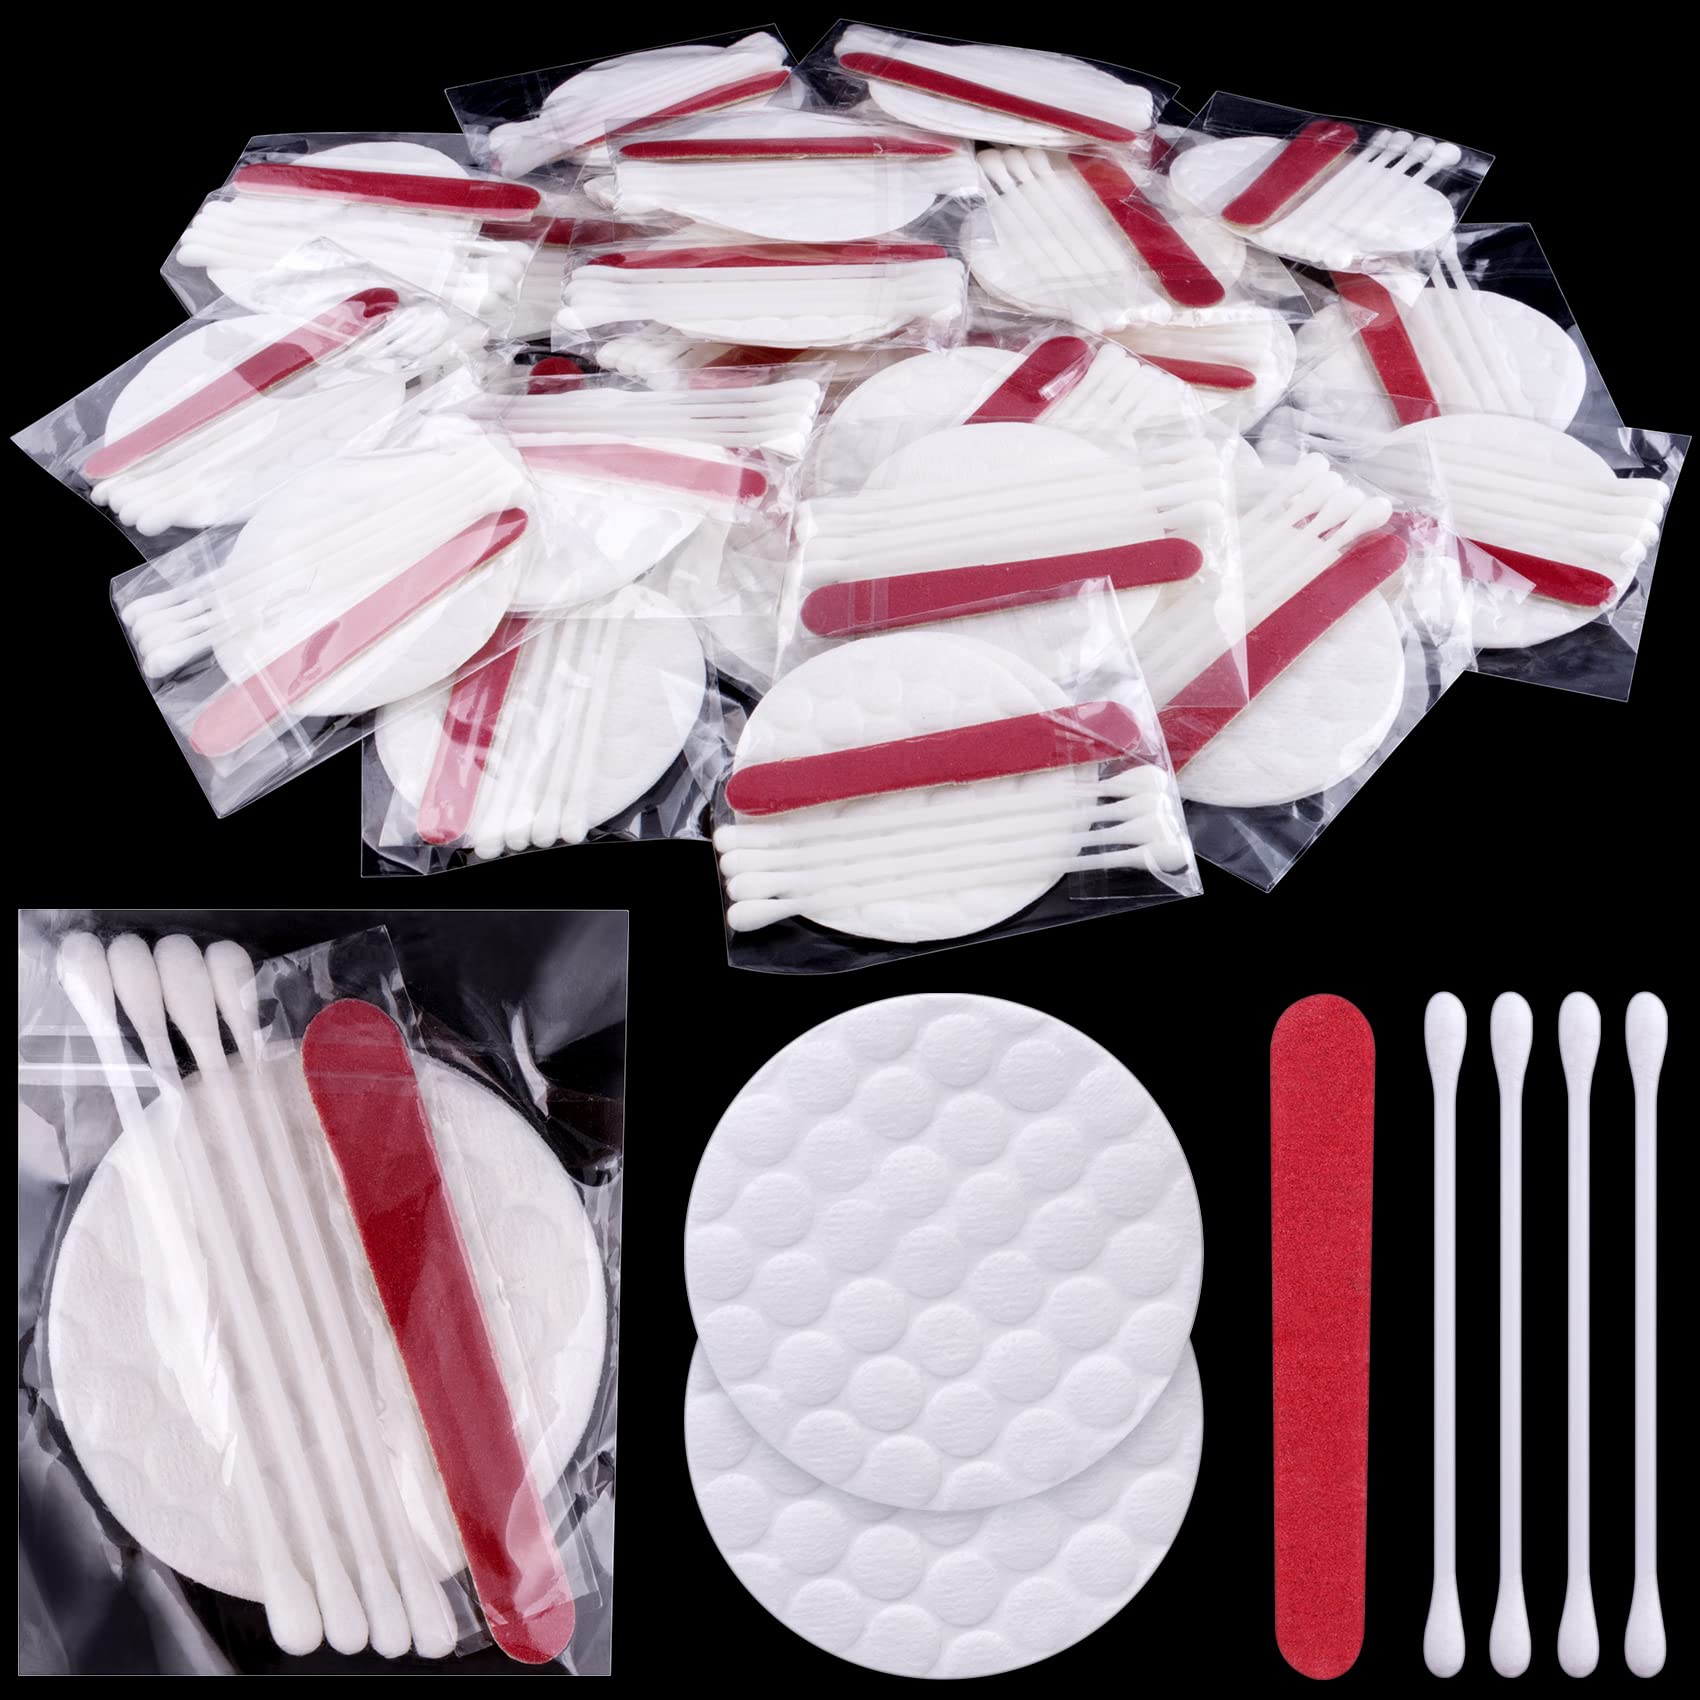 ANCIRS 50 Sets Disposable Hotels Cosmetic Vanity Amenities Hospitality Makeup Kits Accessories, Individually Wrapped with 4 Cotton Swabs & Nail File & 2 Cotton Pads for Motels Toiletries Supplies